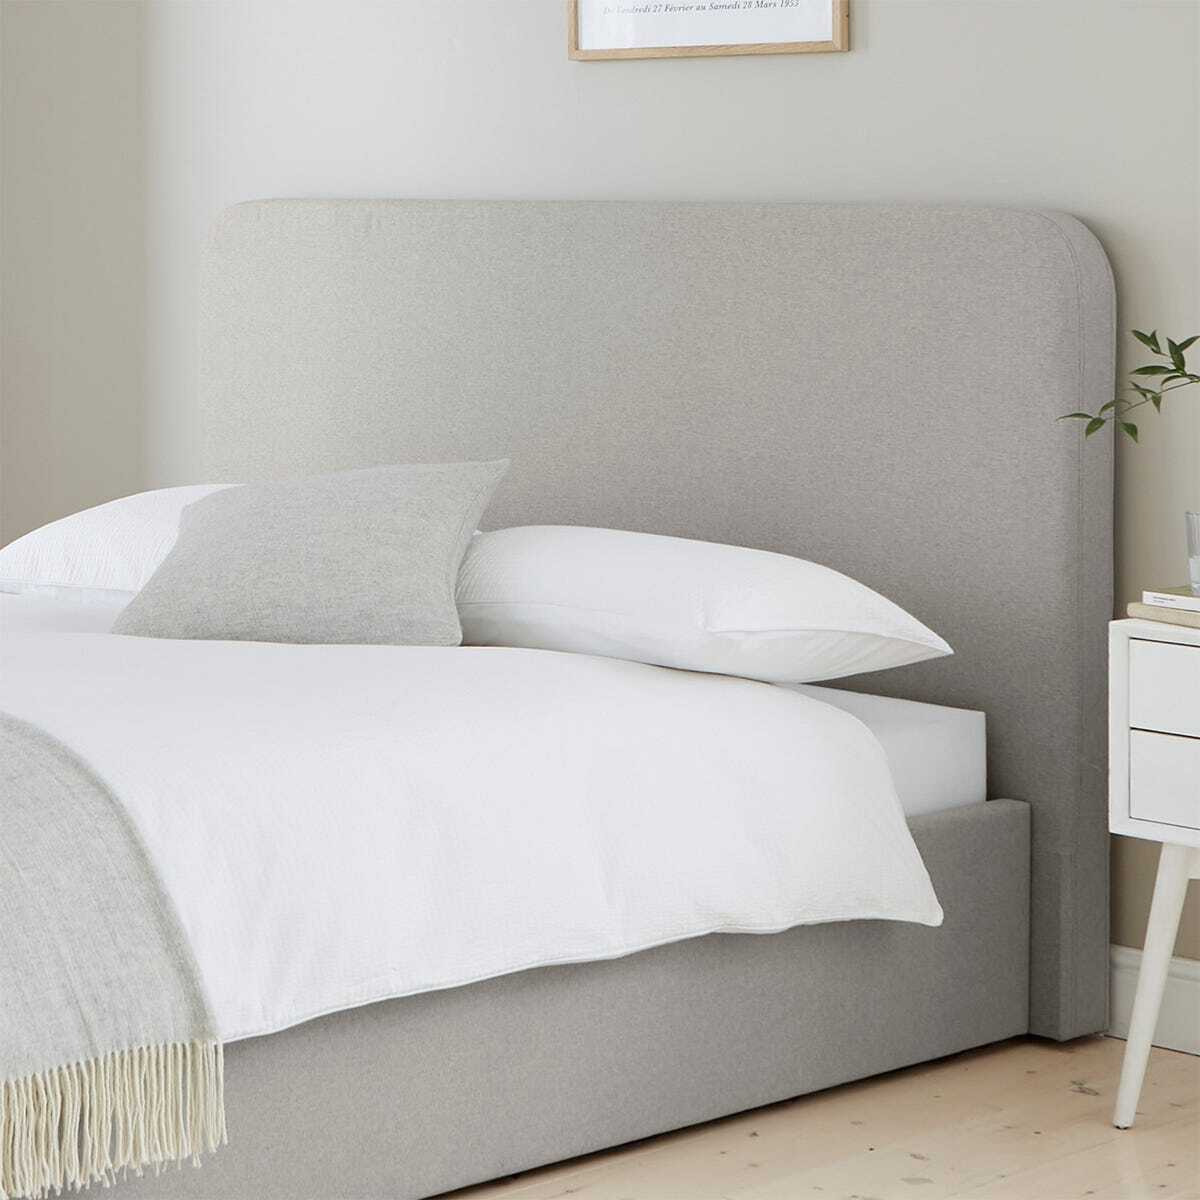 DUSK Ascot Ottoman Storage Bed - King Size - Grey - Linen Look - Curved Headboard